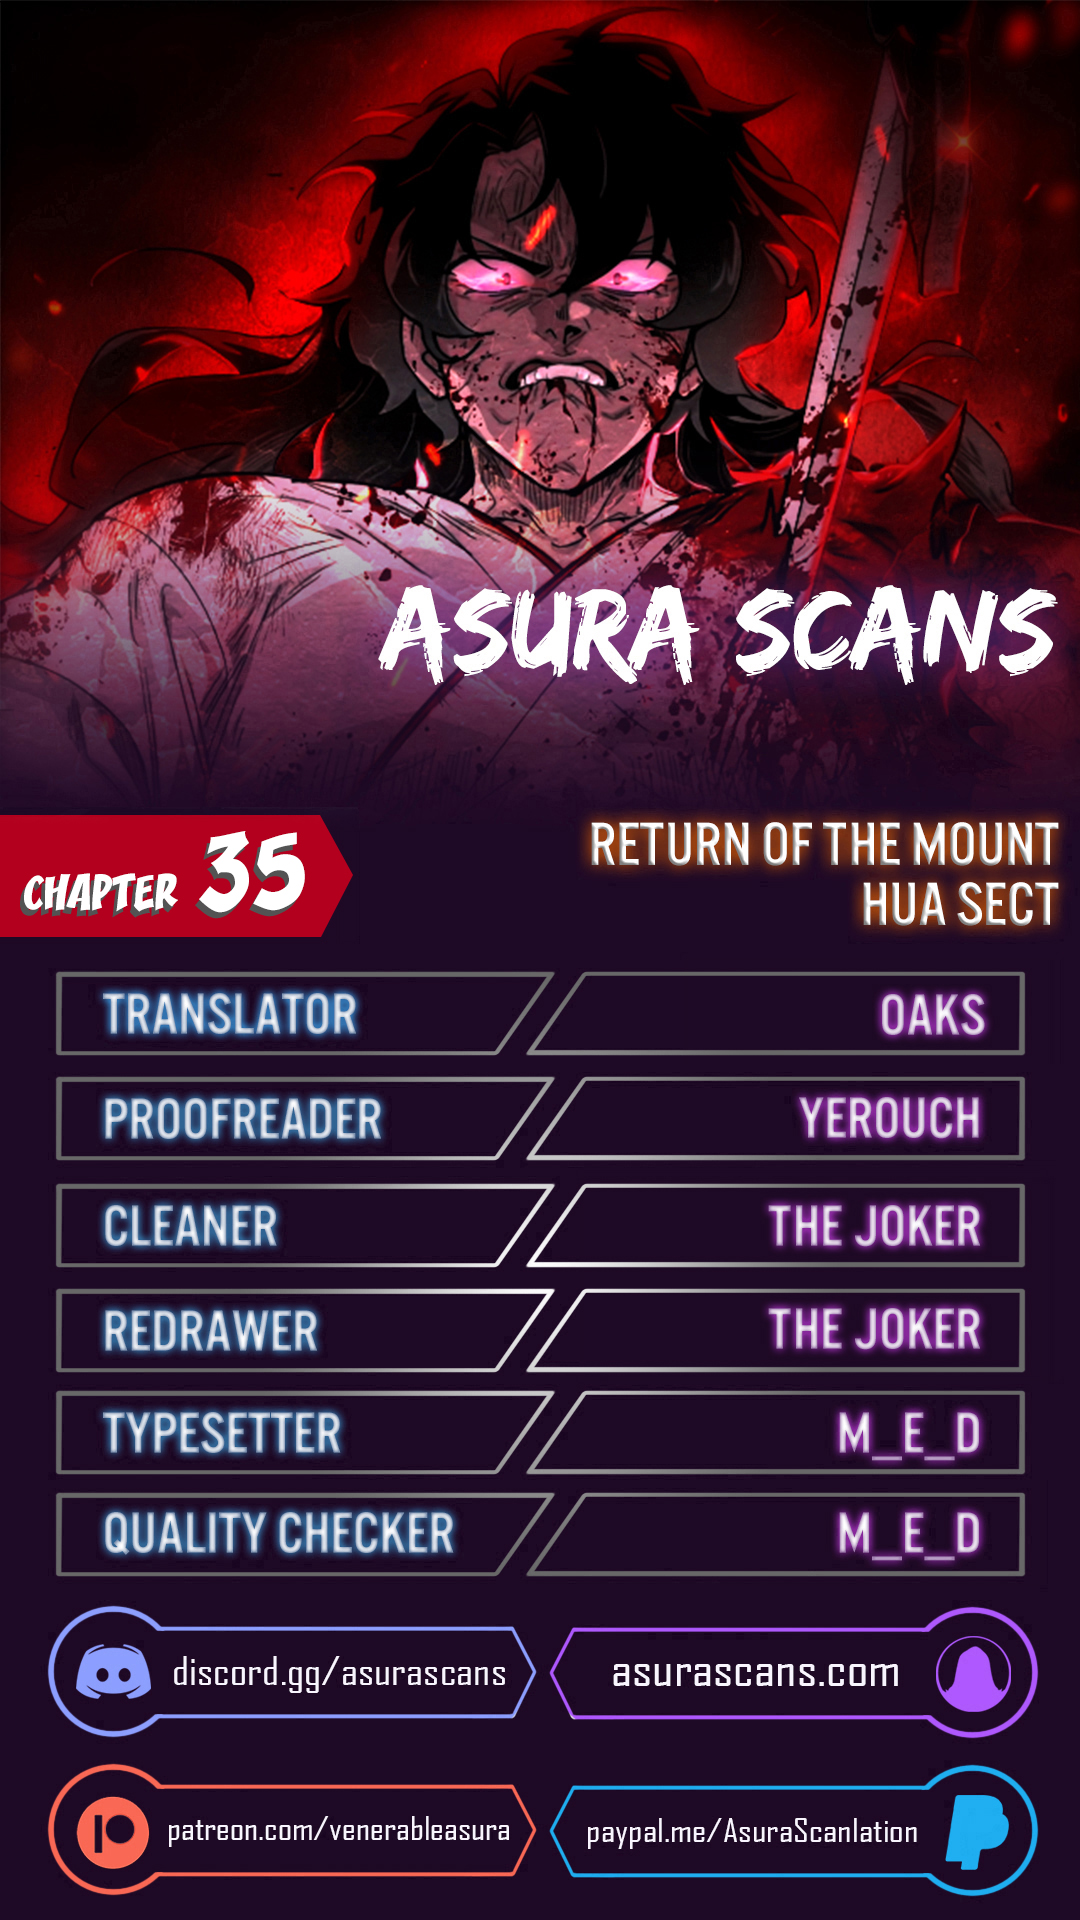 Return of the Mount Hua Sect - Chapter 11659 - Image 1